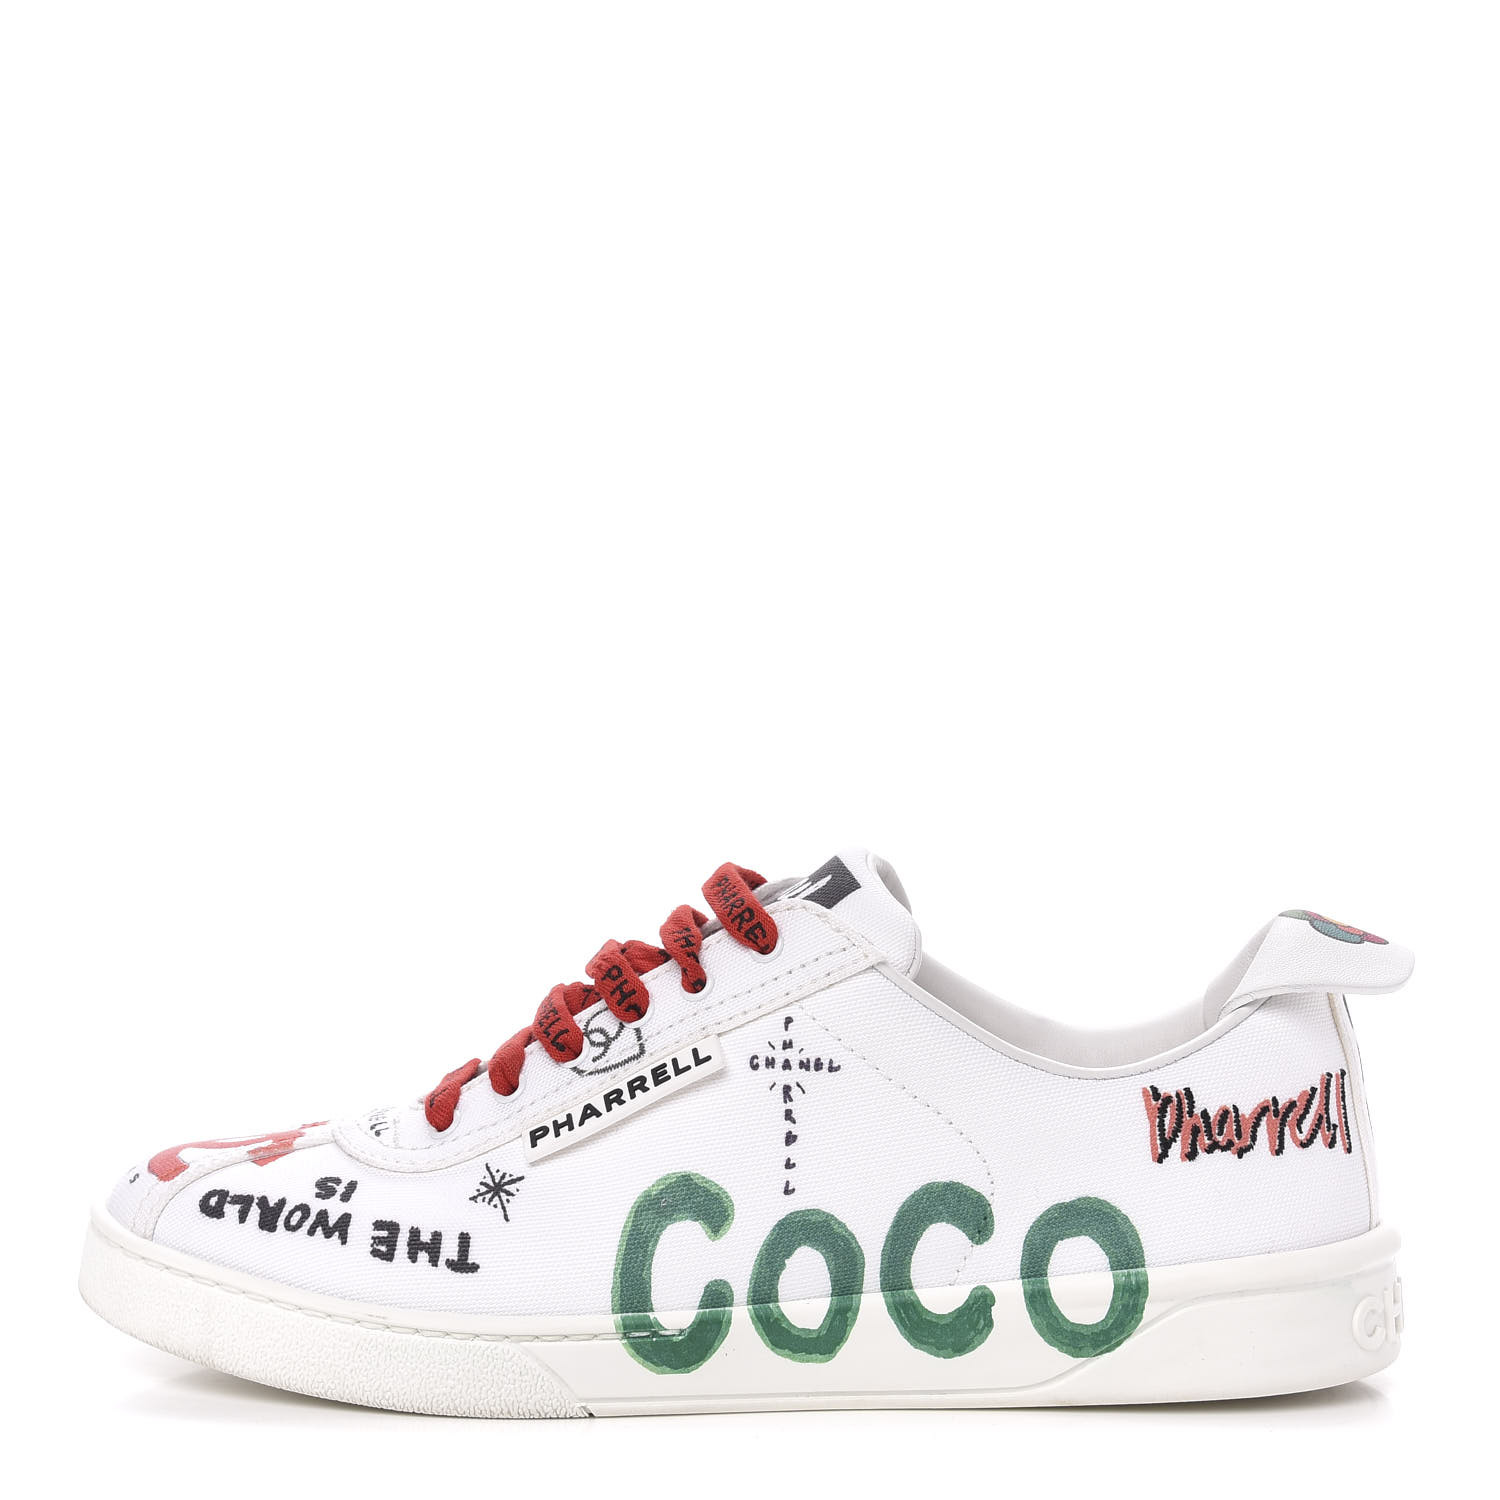 pharrell williams chanel shoes price